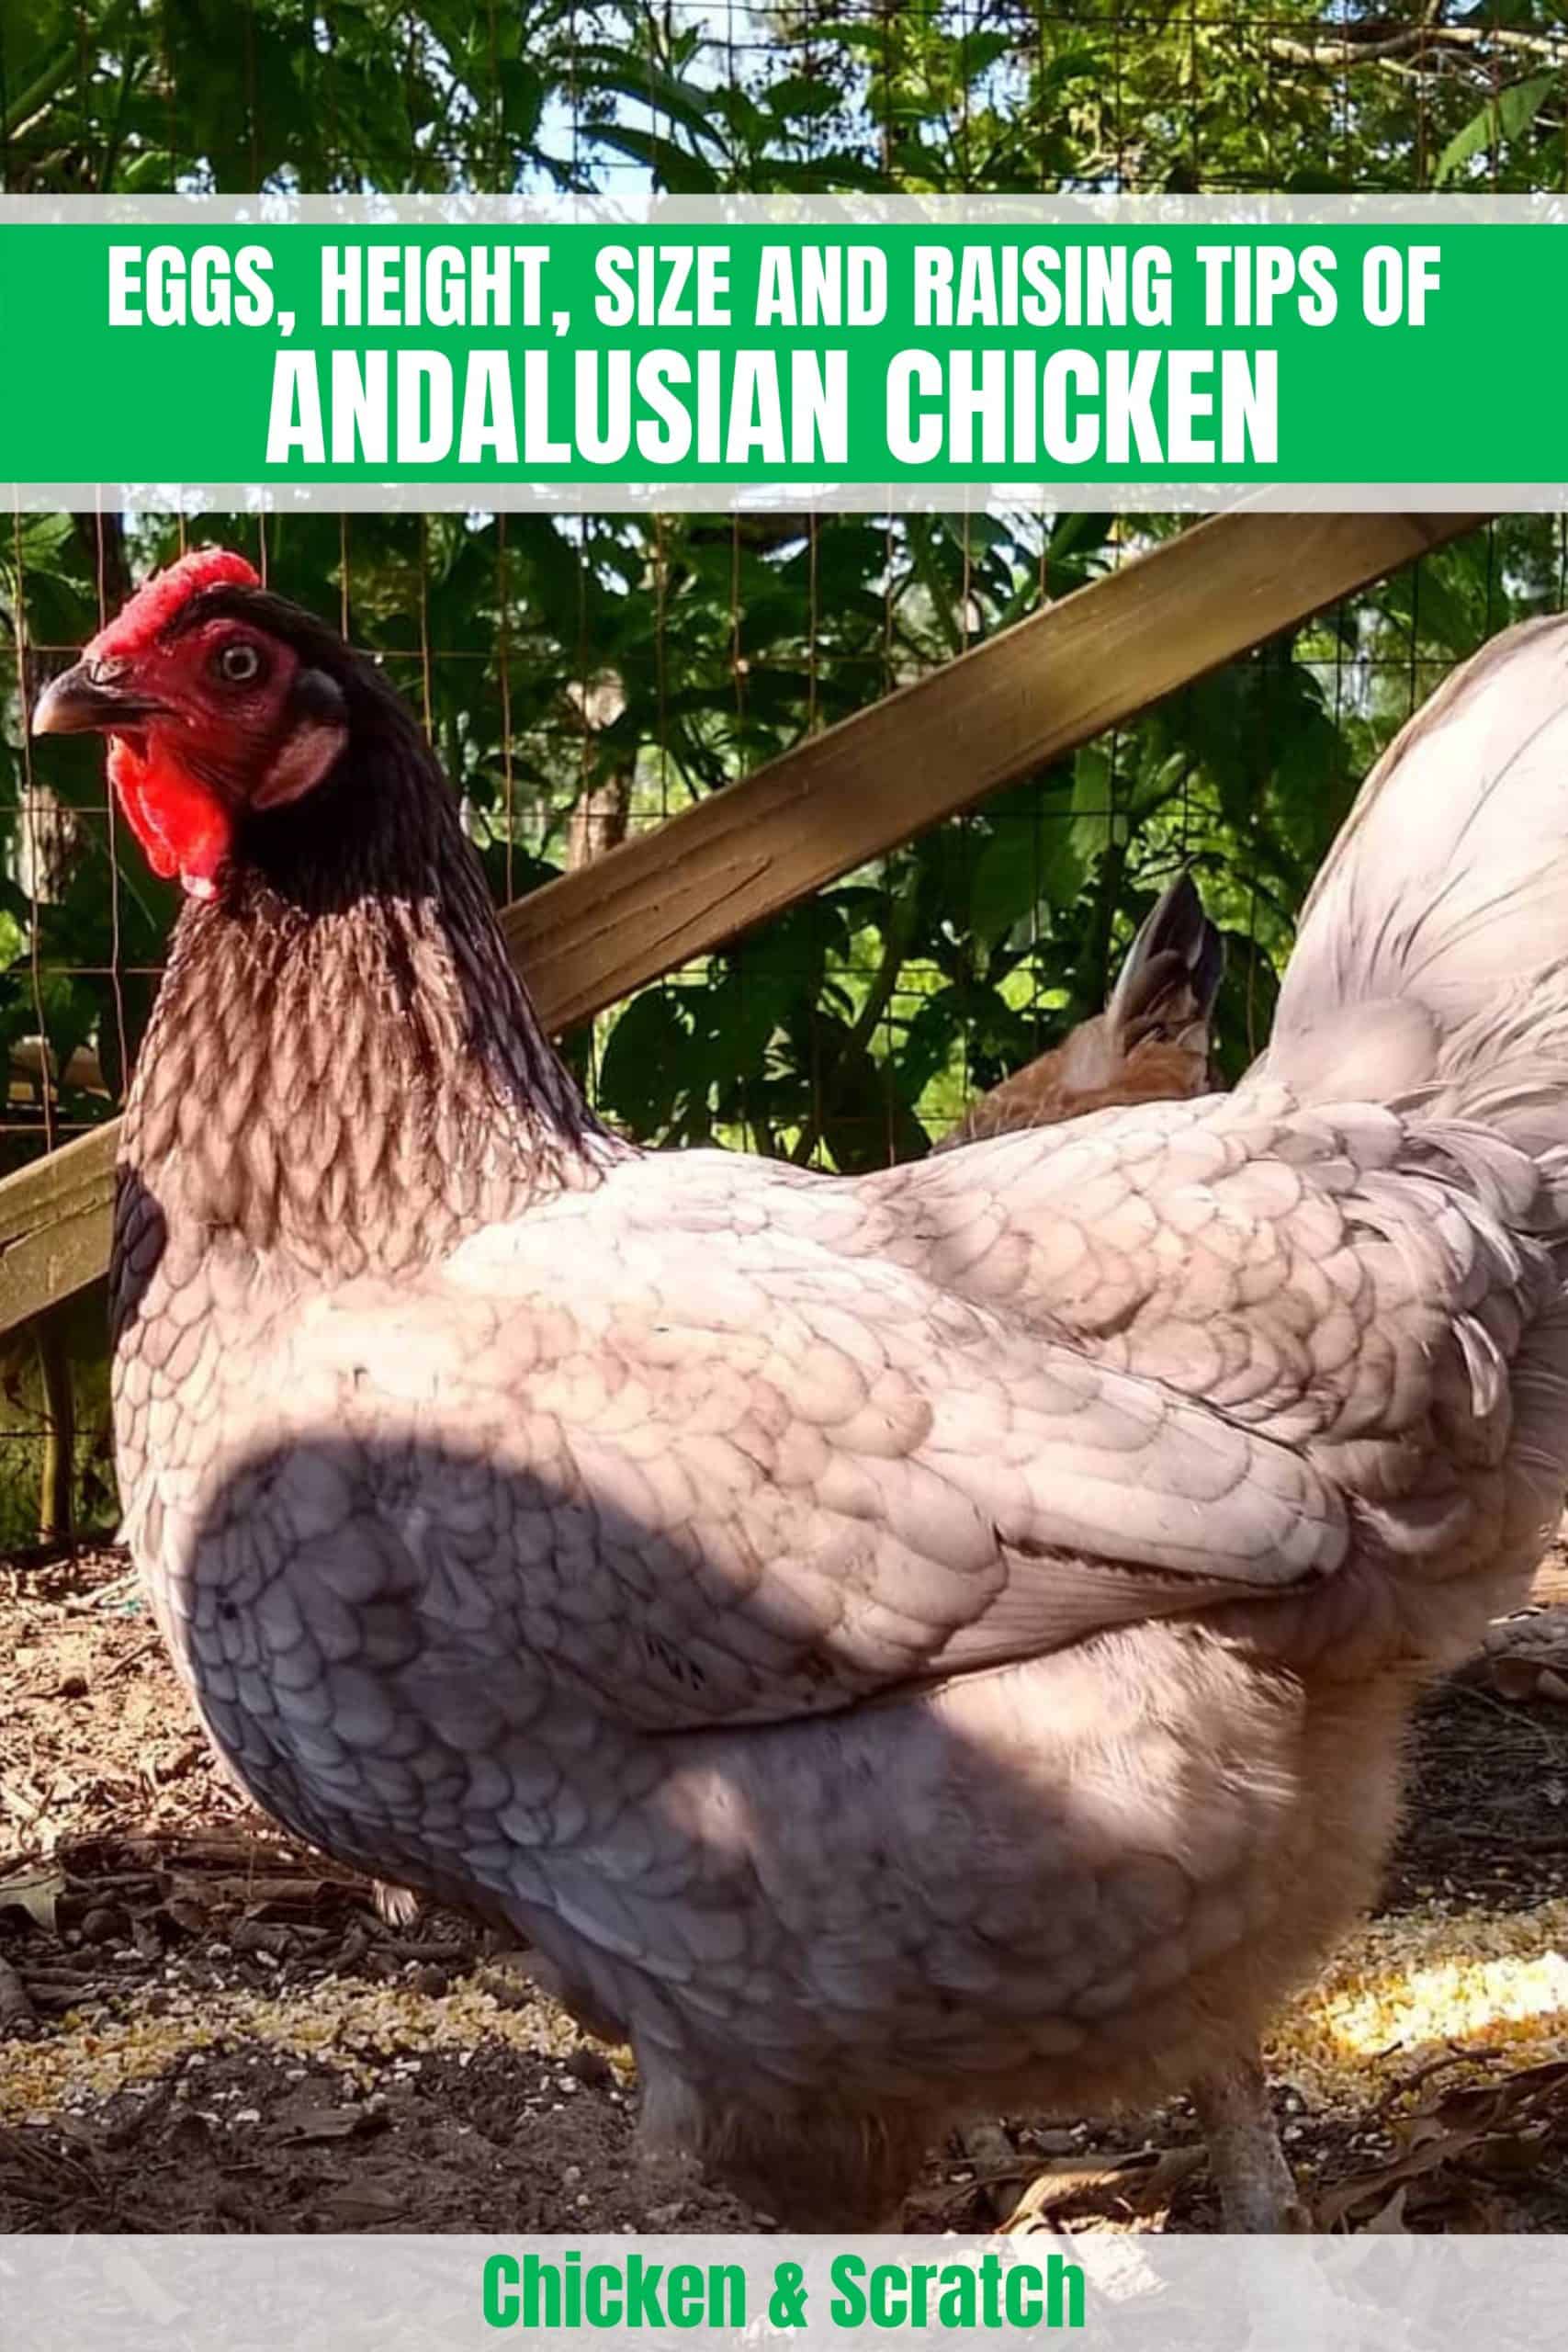 ANDALUSIAN CHICKEN